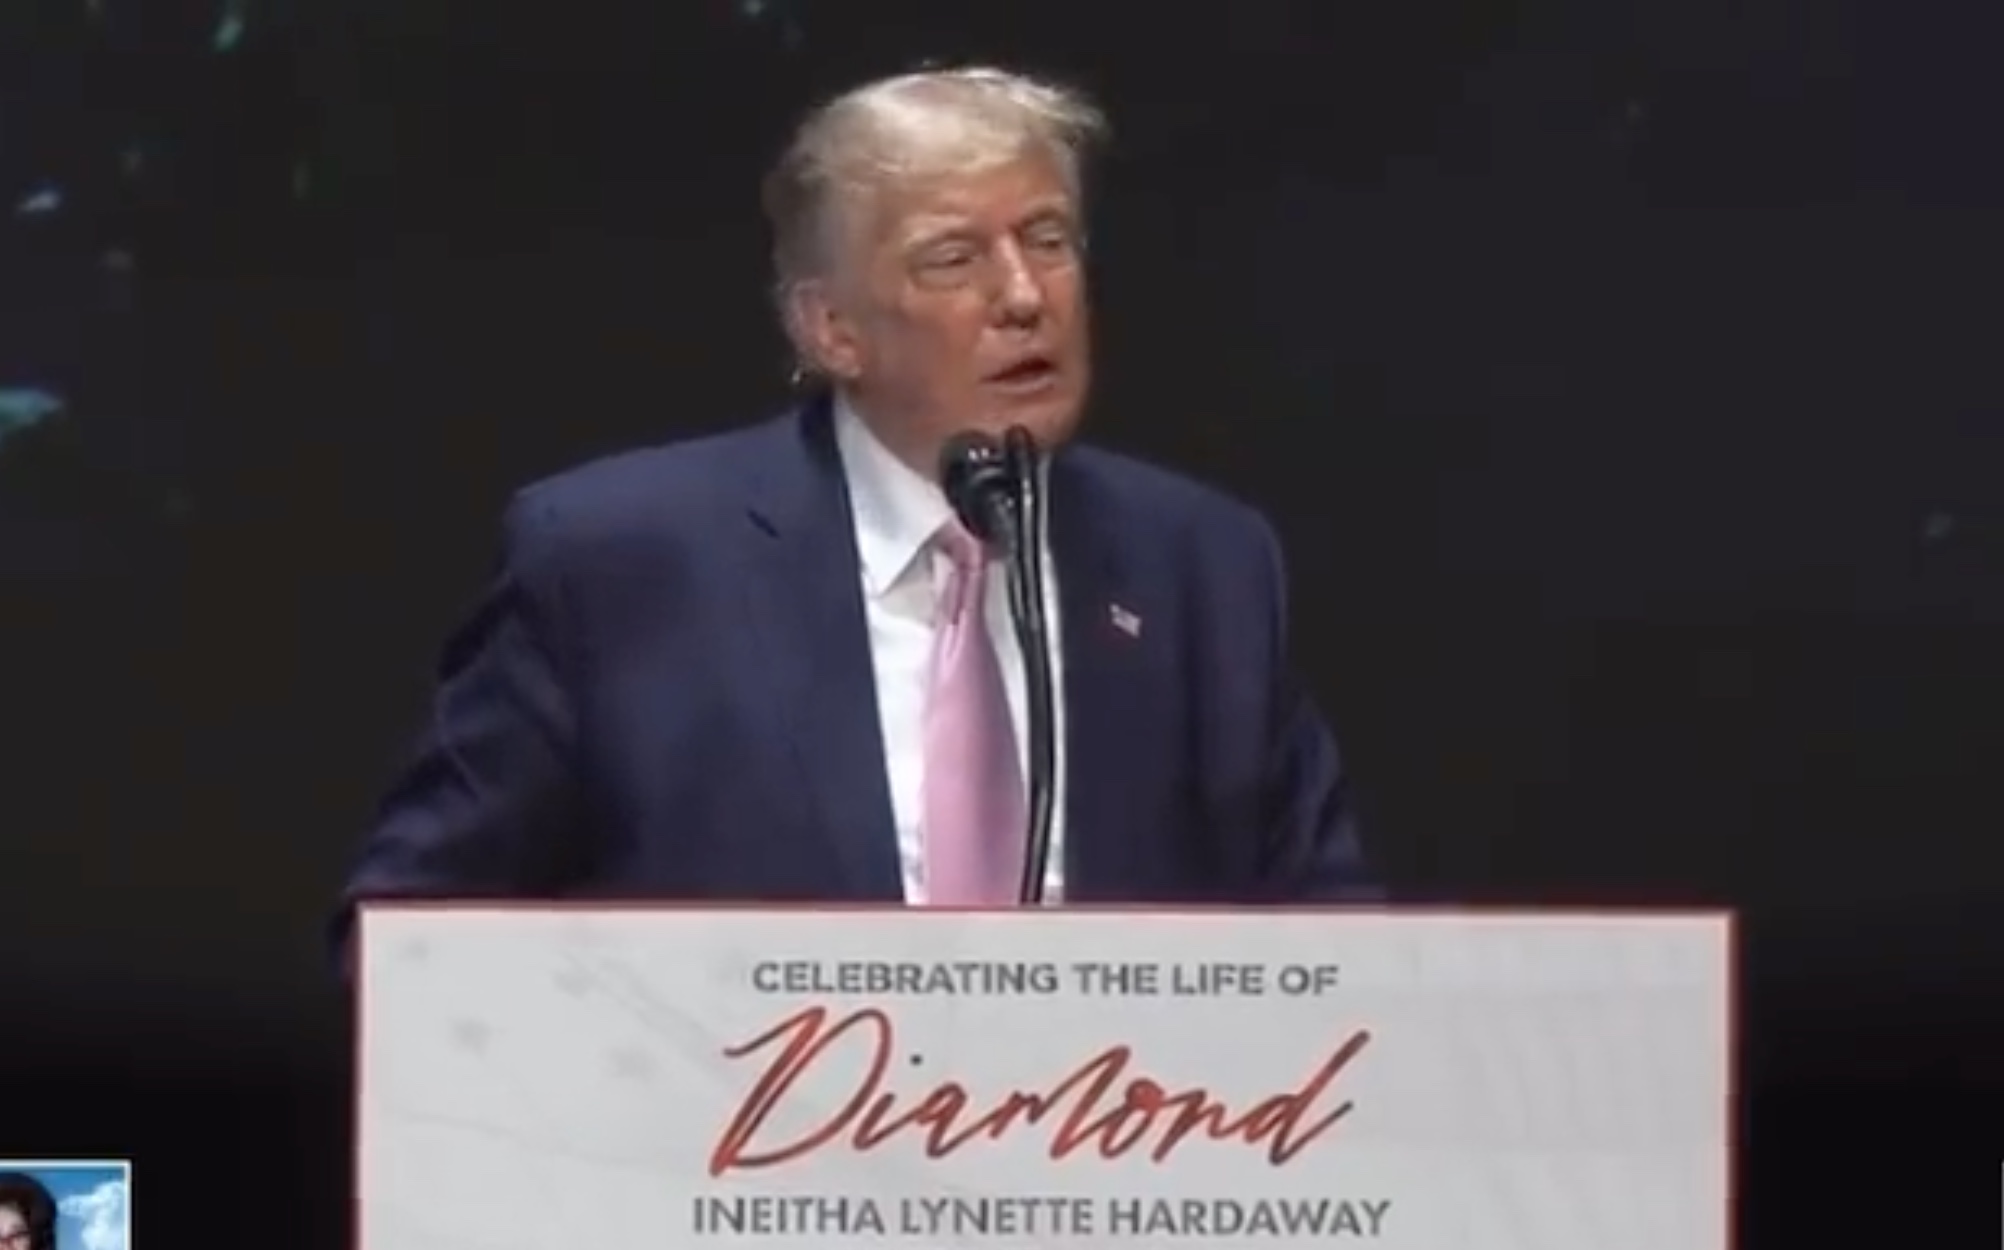 Boorish Trump Eulogizes Diamond By Saying He Hardly Knew Silk, Ranting About the 2020 Election, and Complaining About the Length of the Funeral (mediaite.com)